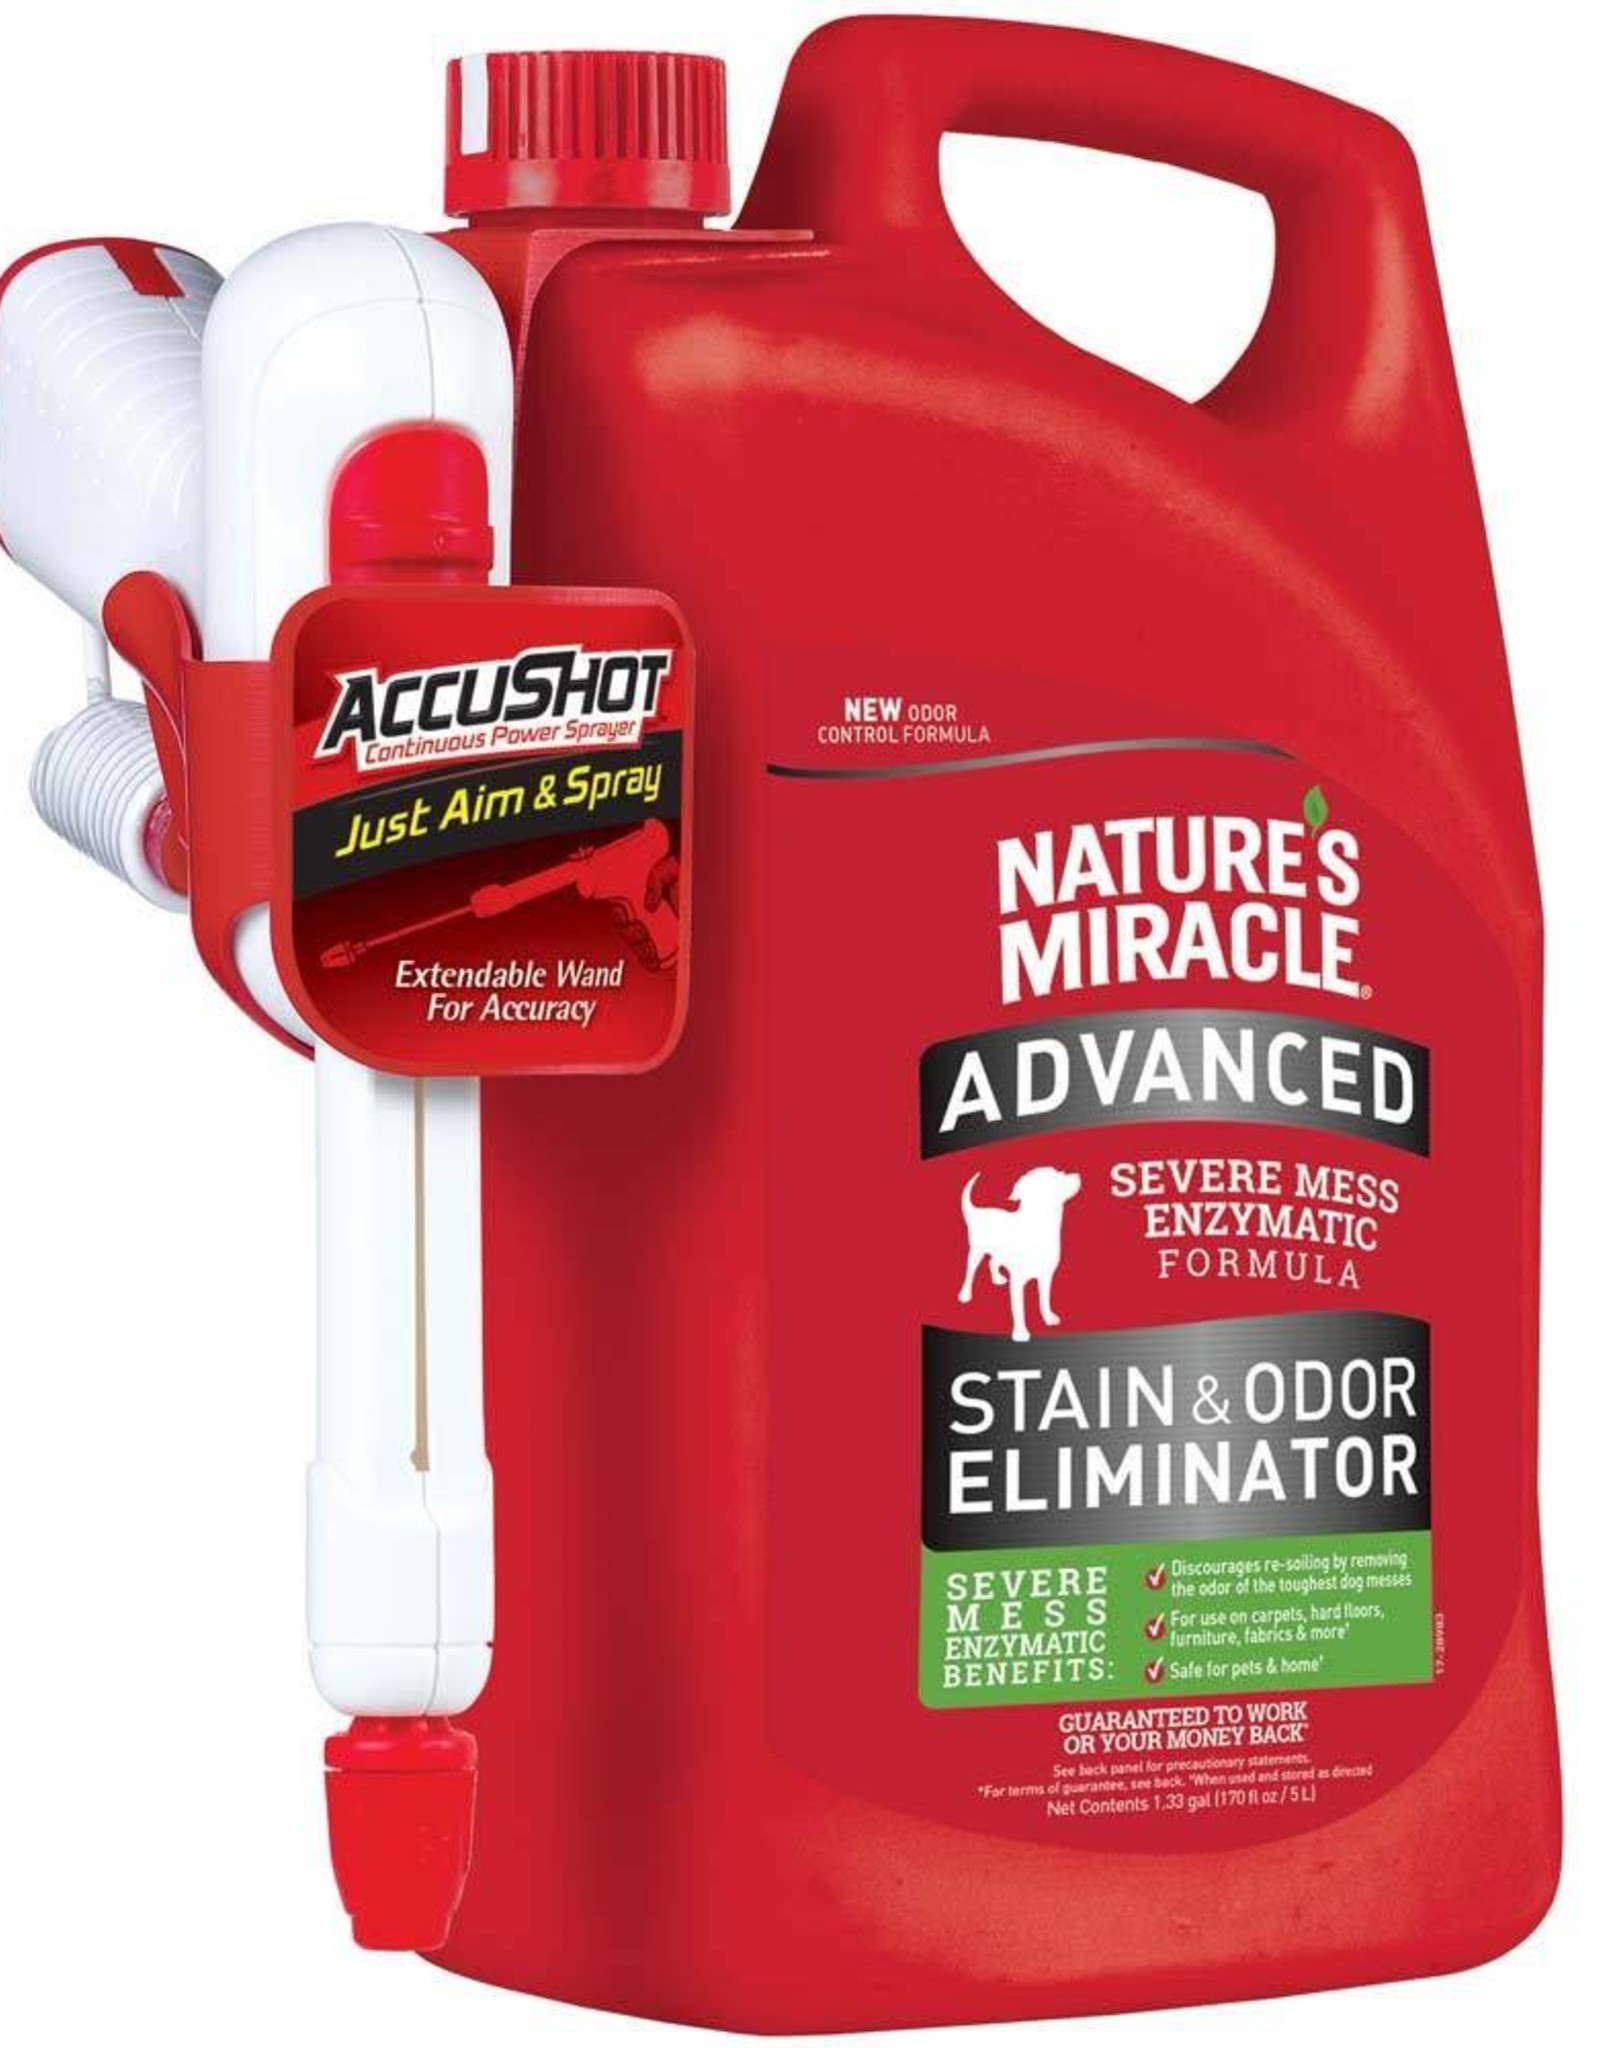 SPECTRUM BRANDS Nature's Miracle Advanced Stain & Odor Remover AccuShot 170oz